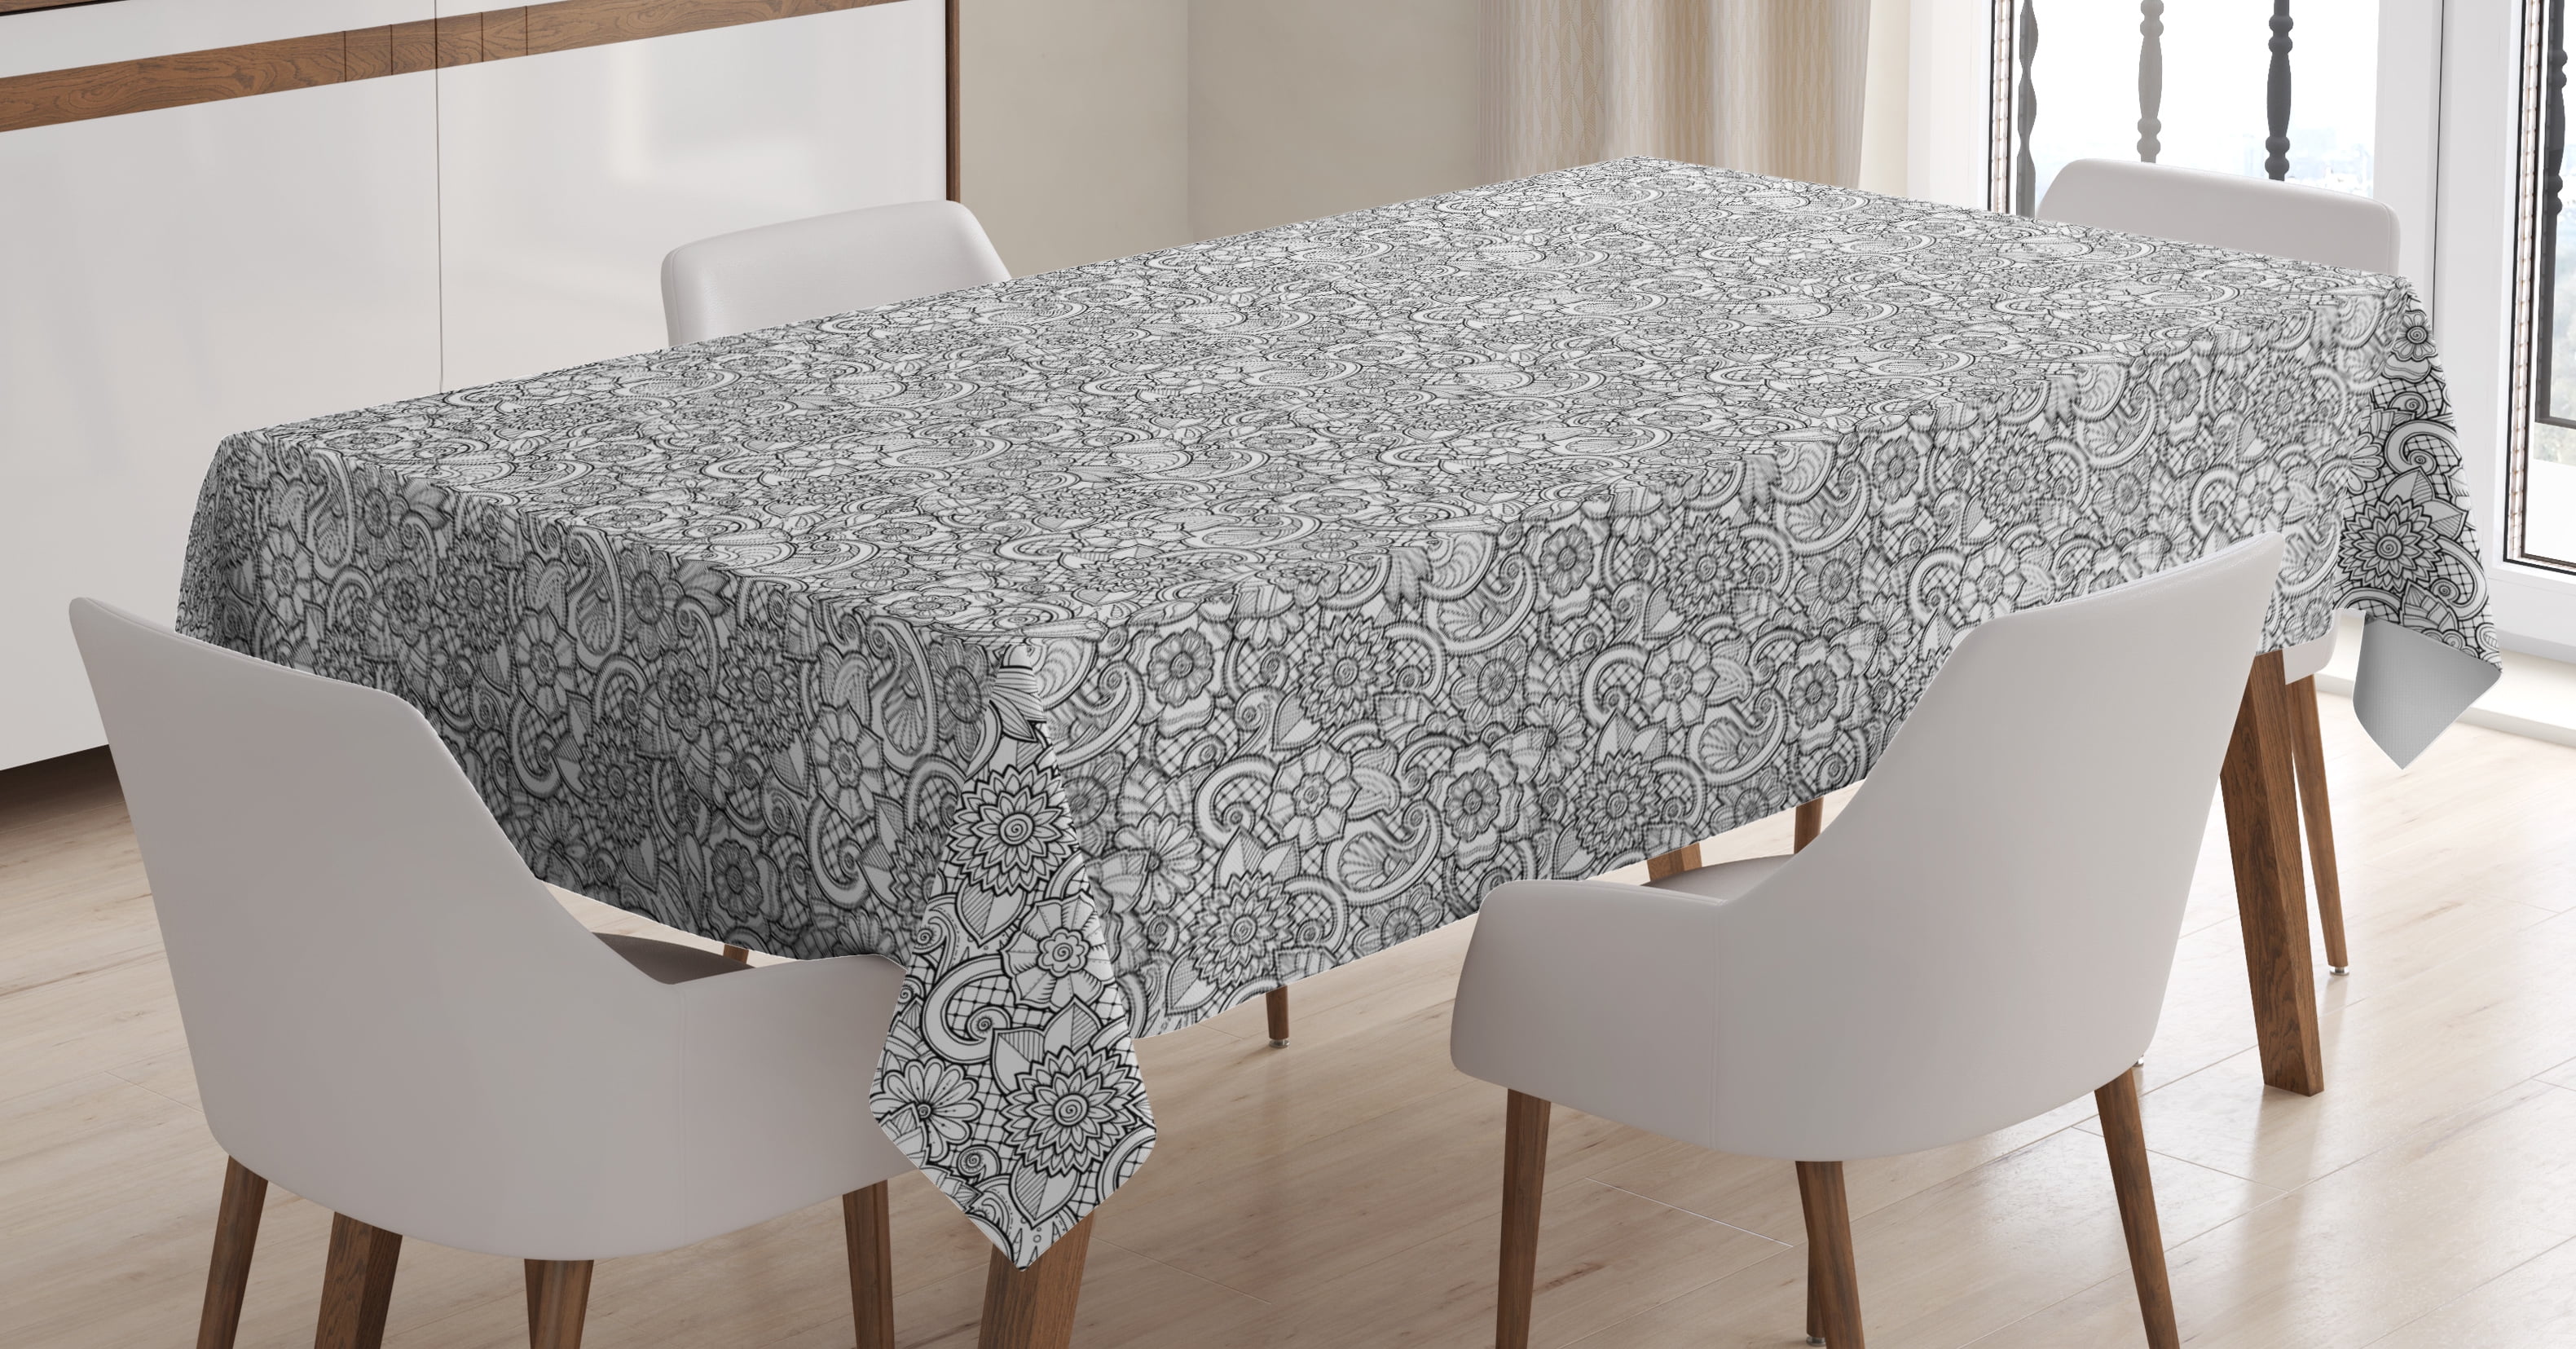 Black and White Tablecloth, Paisley Design with Sketch Style Flowers ...